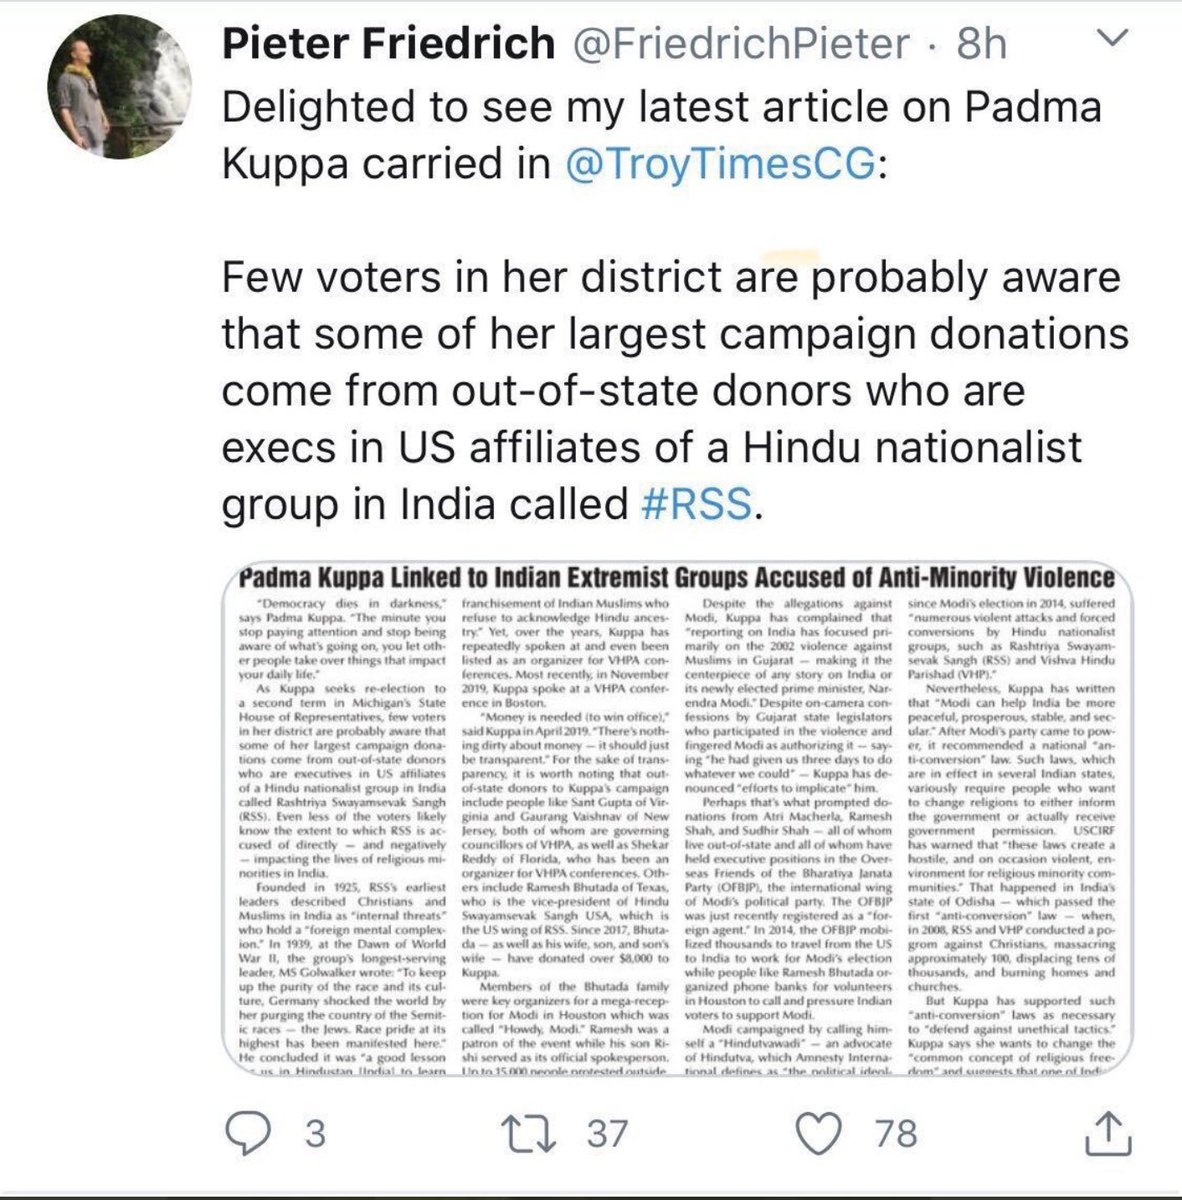 Tip #3: do some *basic* research on your source. Why does Pieter Friedrich post advertisements in newspapers, but tweets that the newspaper published his "article"? He even cropped out the ad notice at the bottom! That's got to be shady by  @slate's standards, right? 4/n